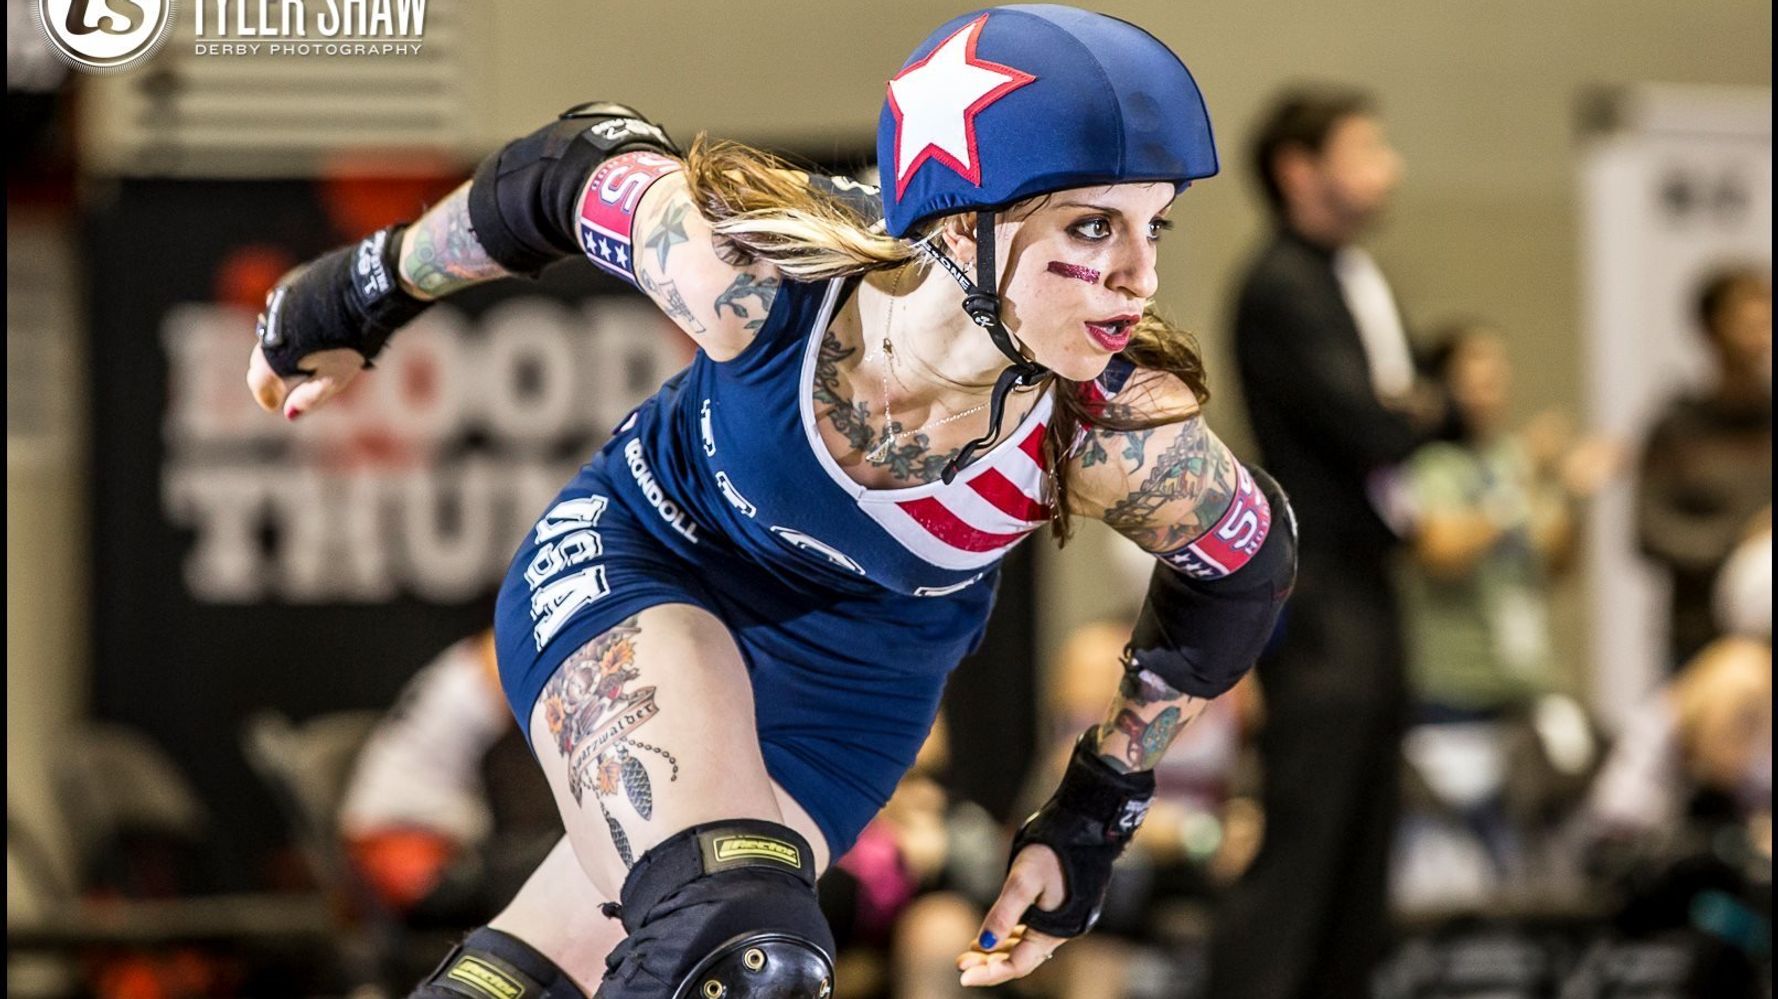 Why Is Roller Derby Important To So Many Queer Women?